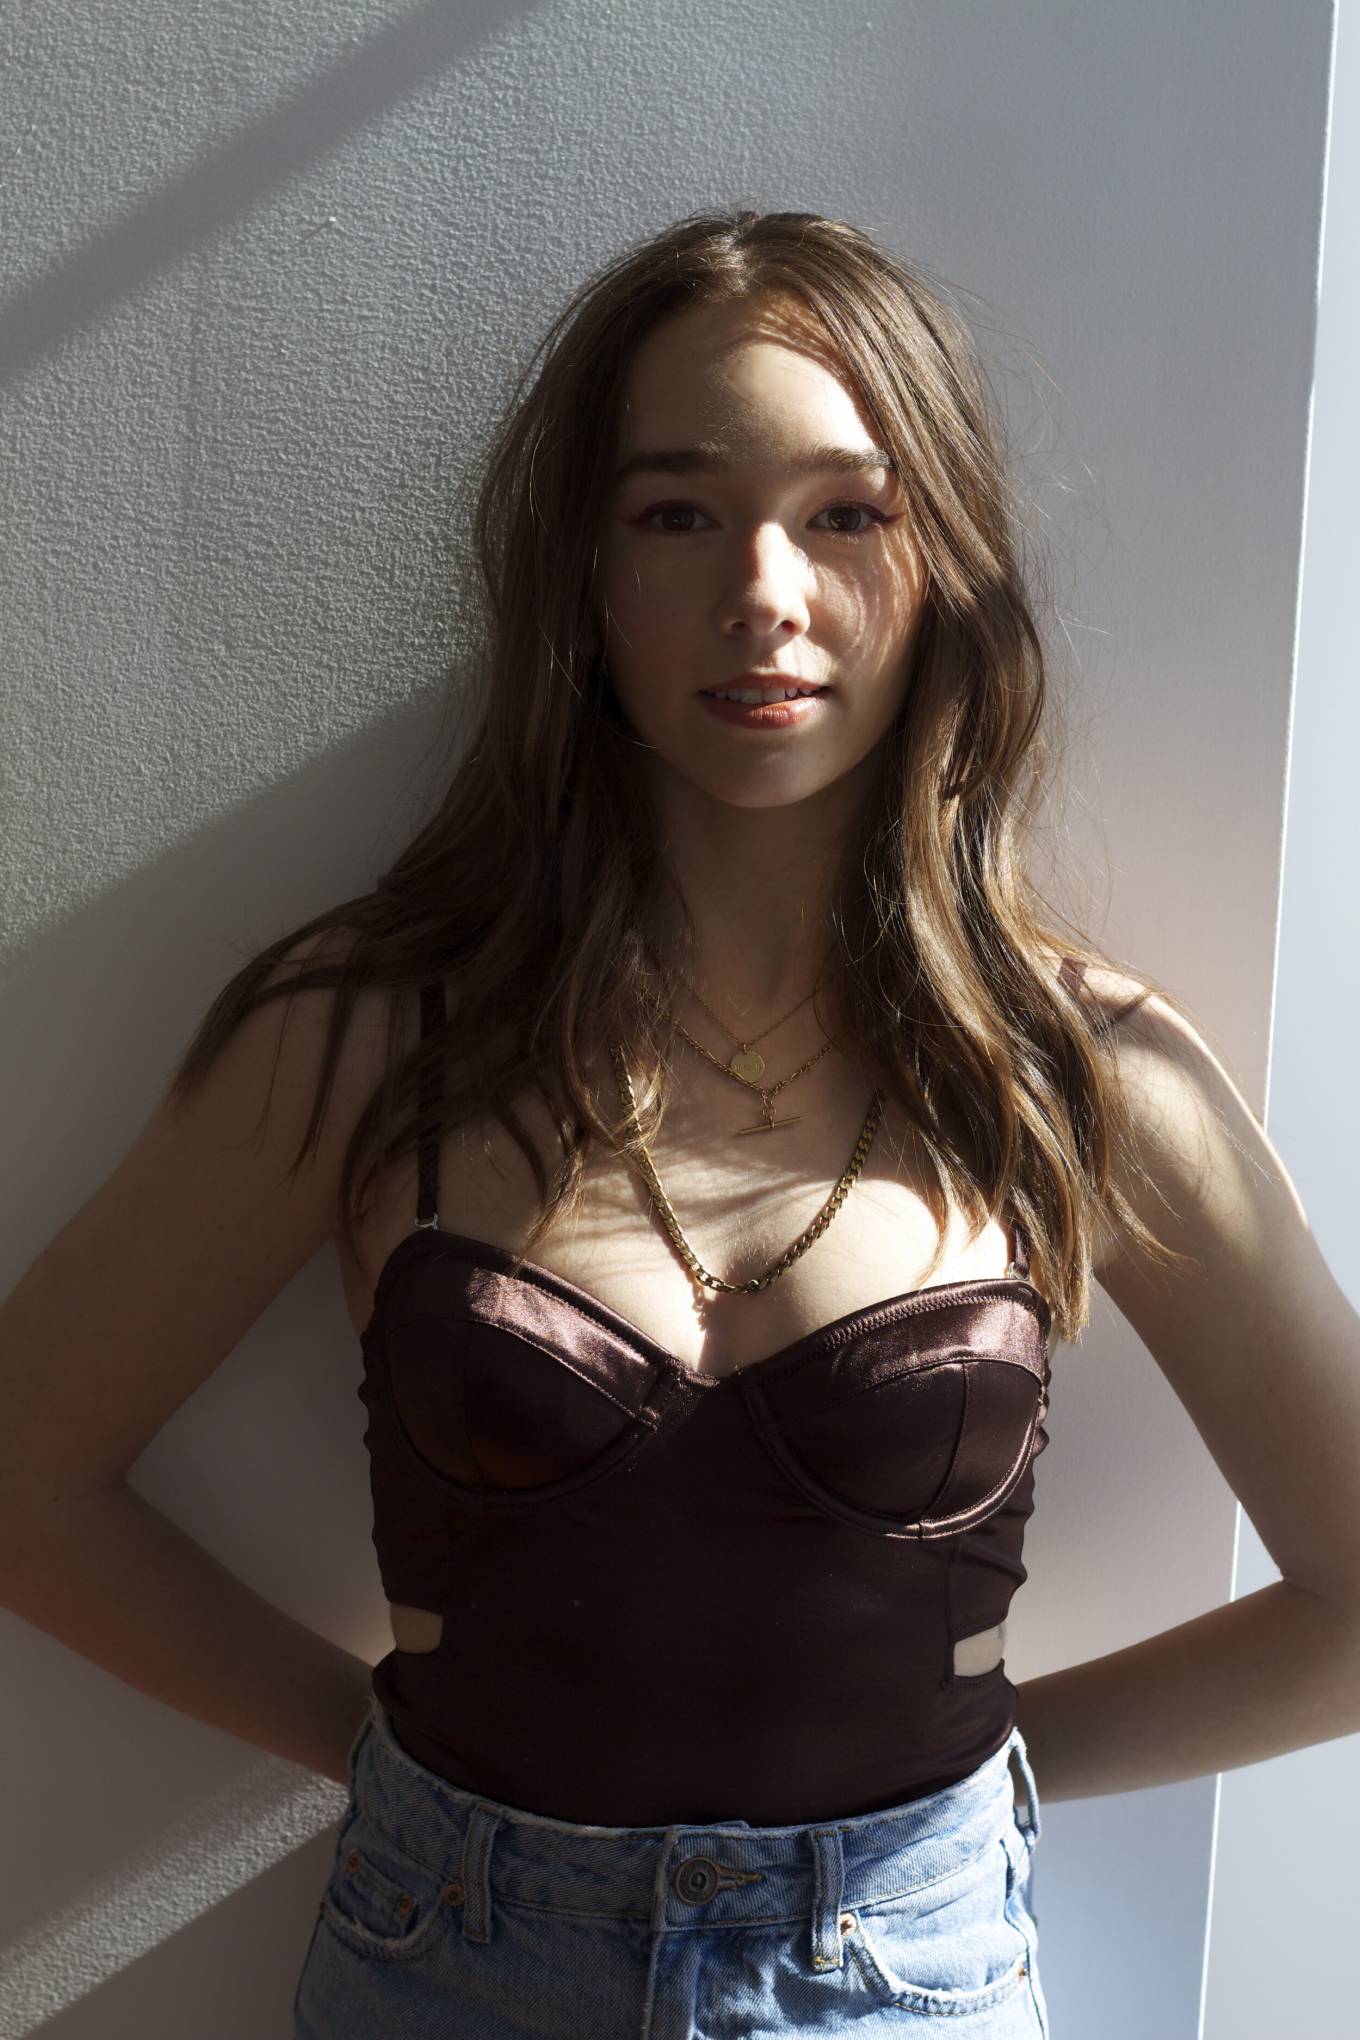 Holly Taylor 2021 : Holly Taylor - The Bare Magazine (April 2021)-09. 